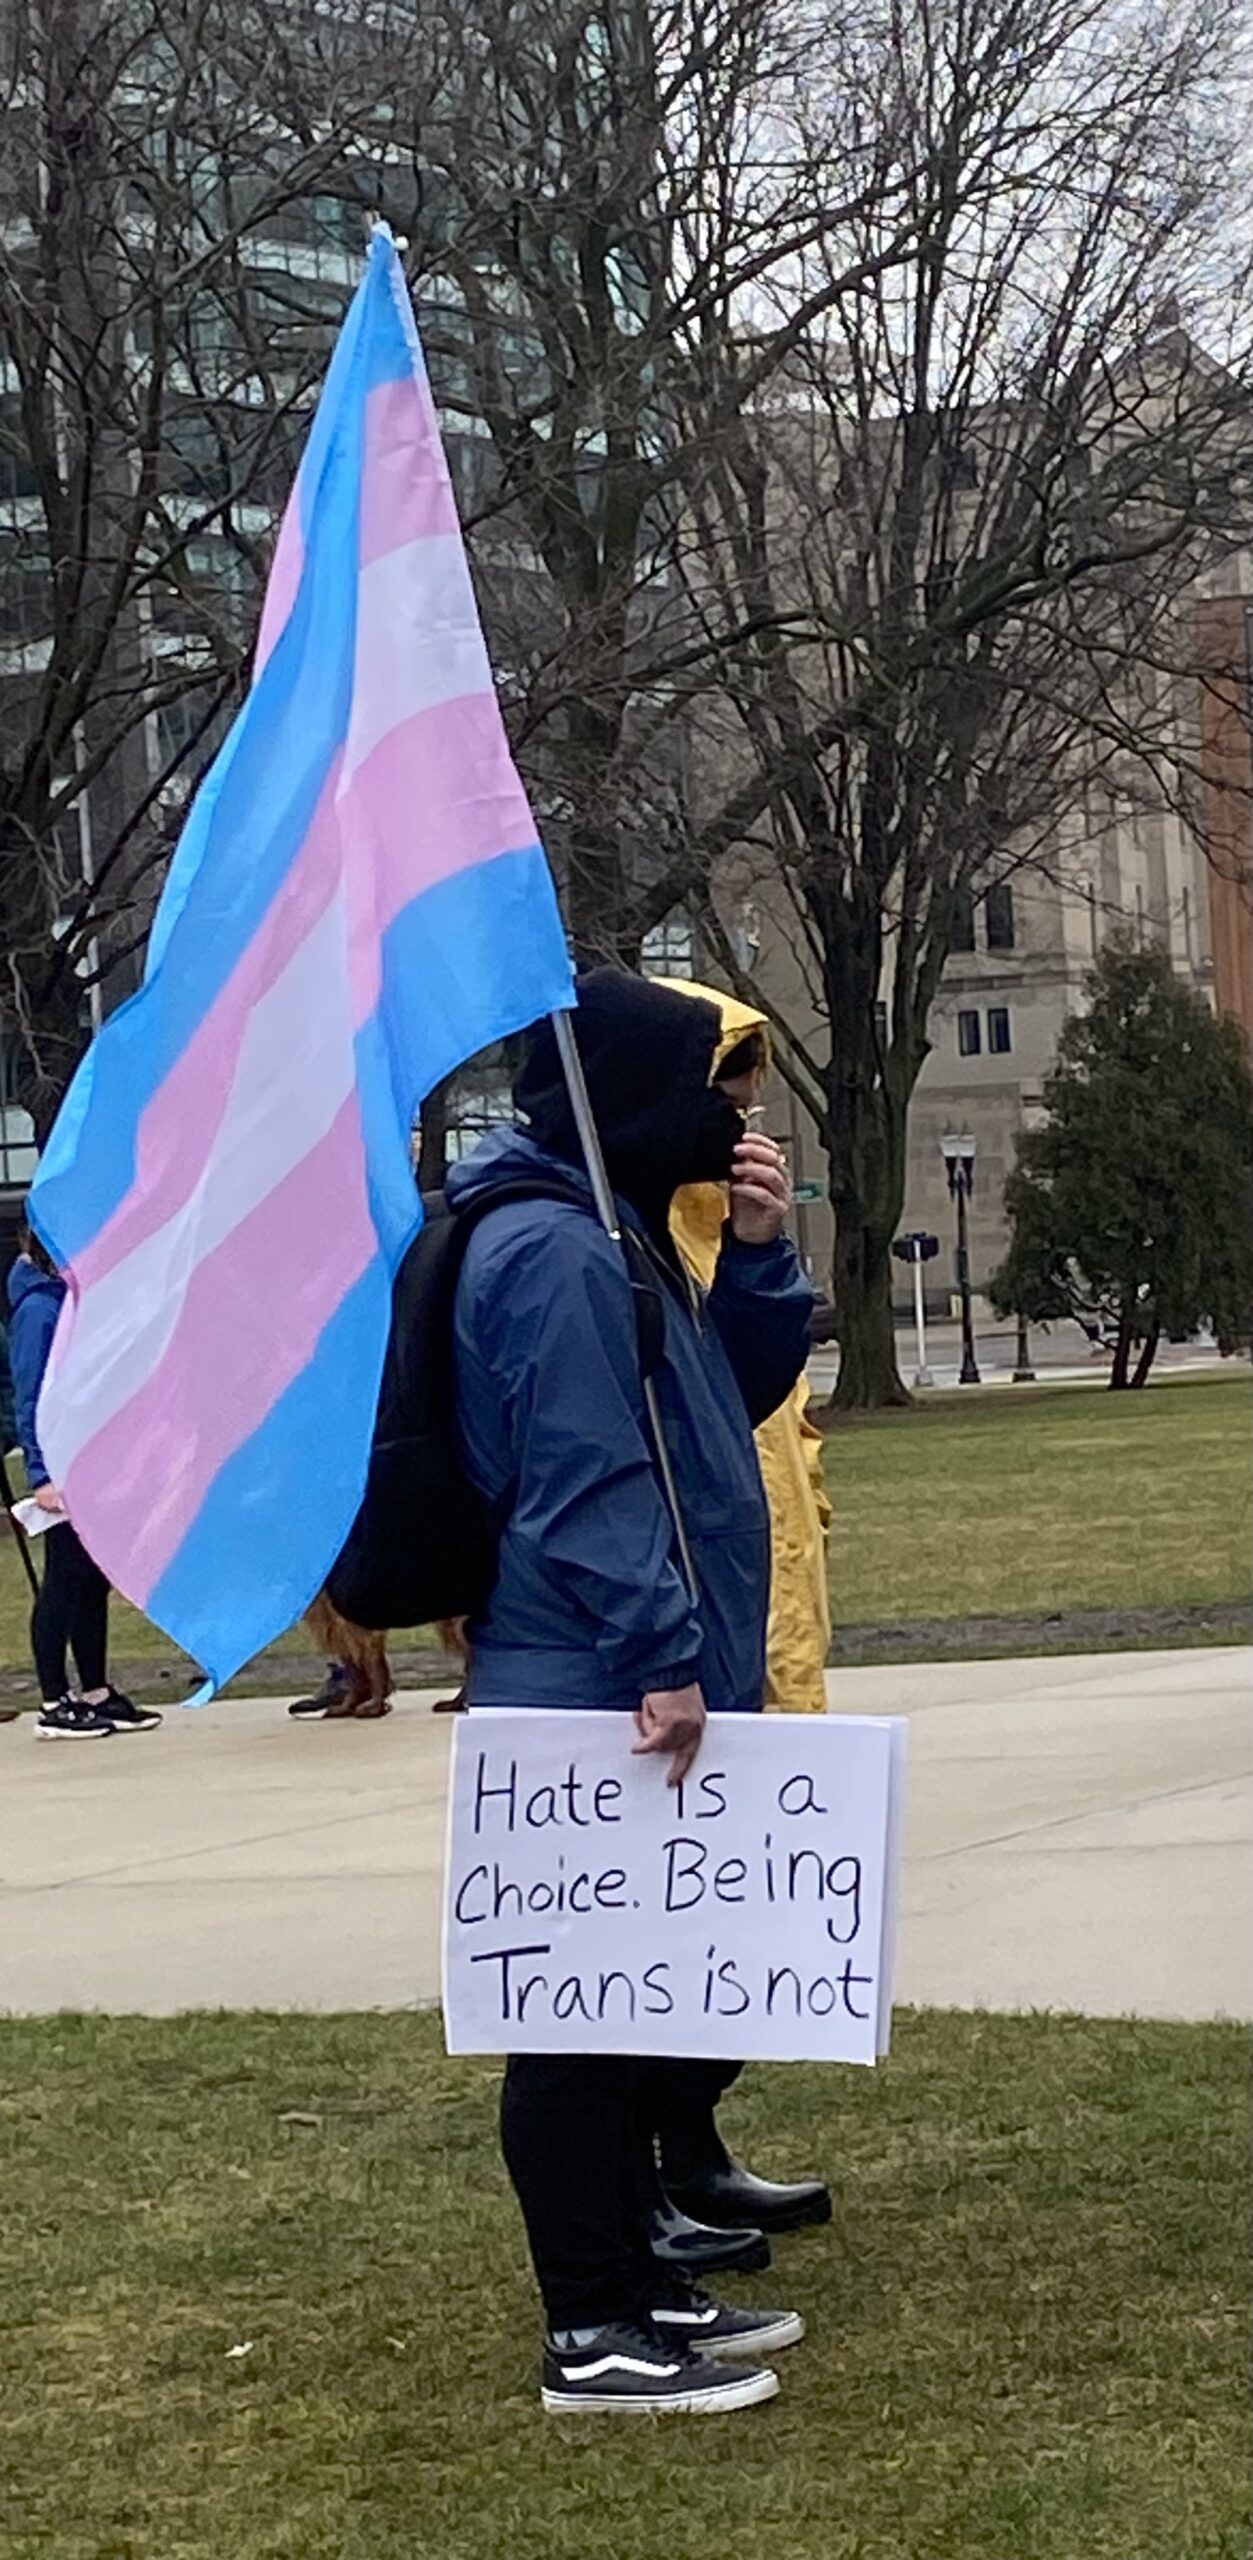 Activist holding a transgender flag (blue, pink, and white) and a sign that says "hate is a choice. being trans is not."